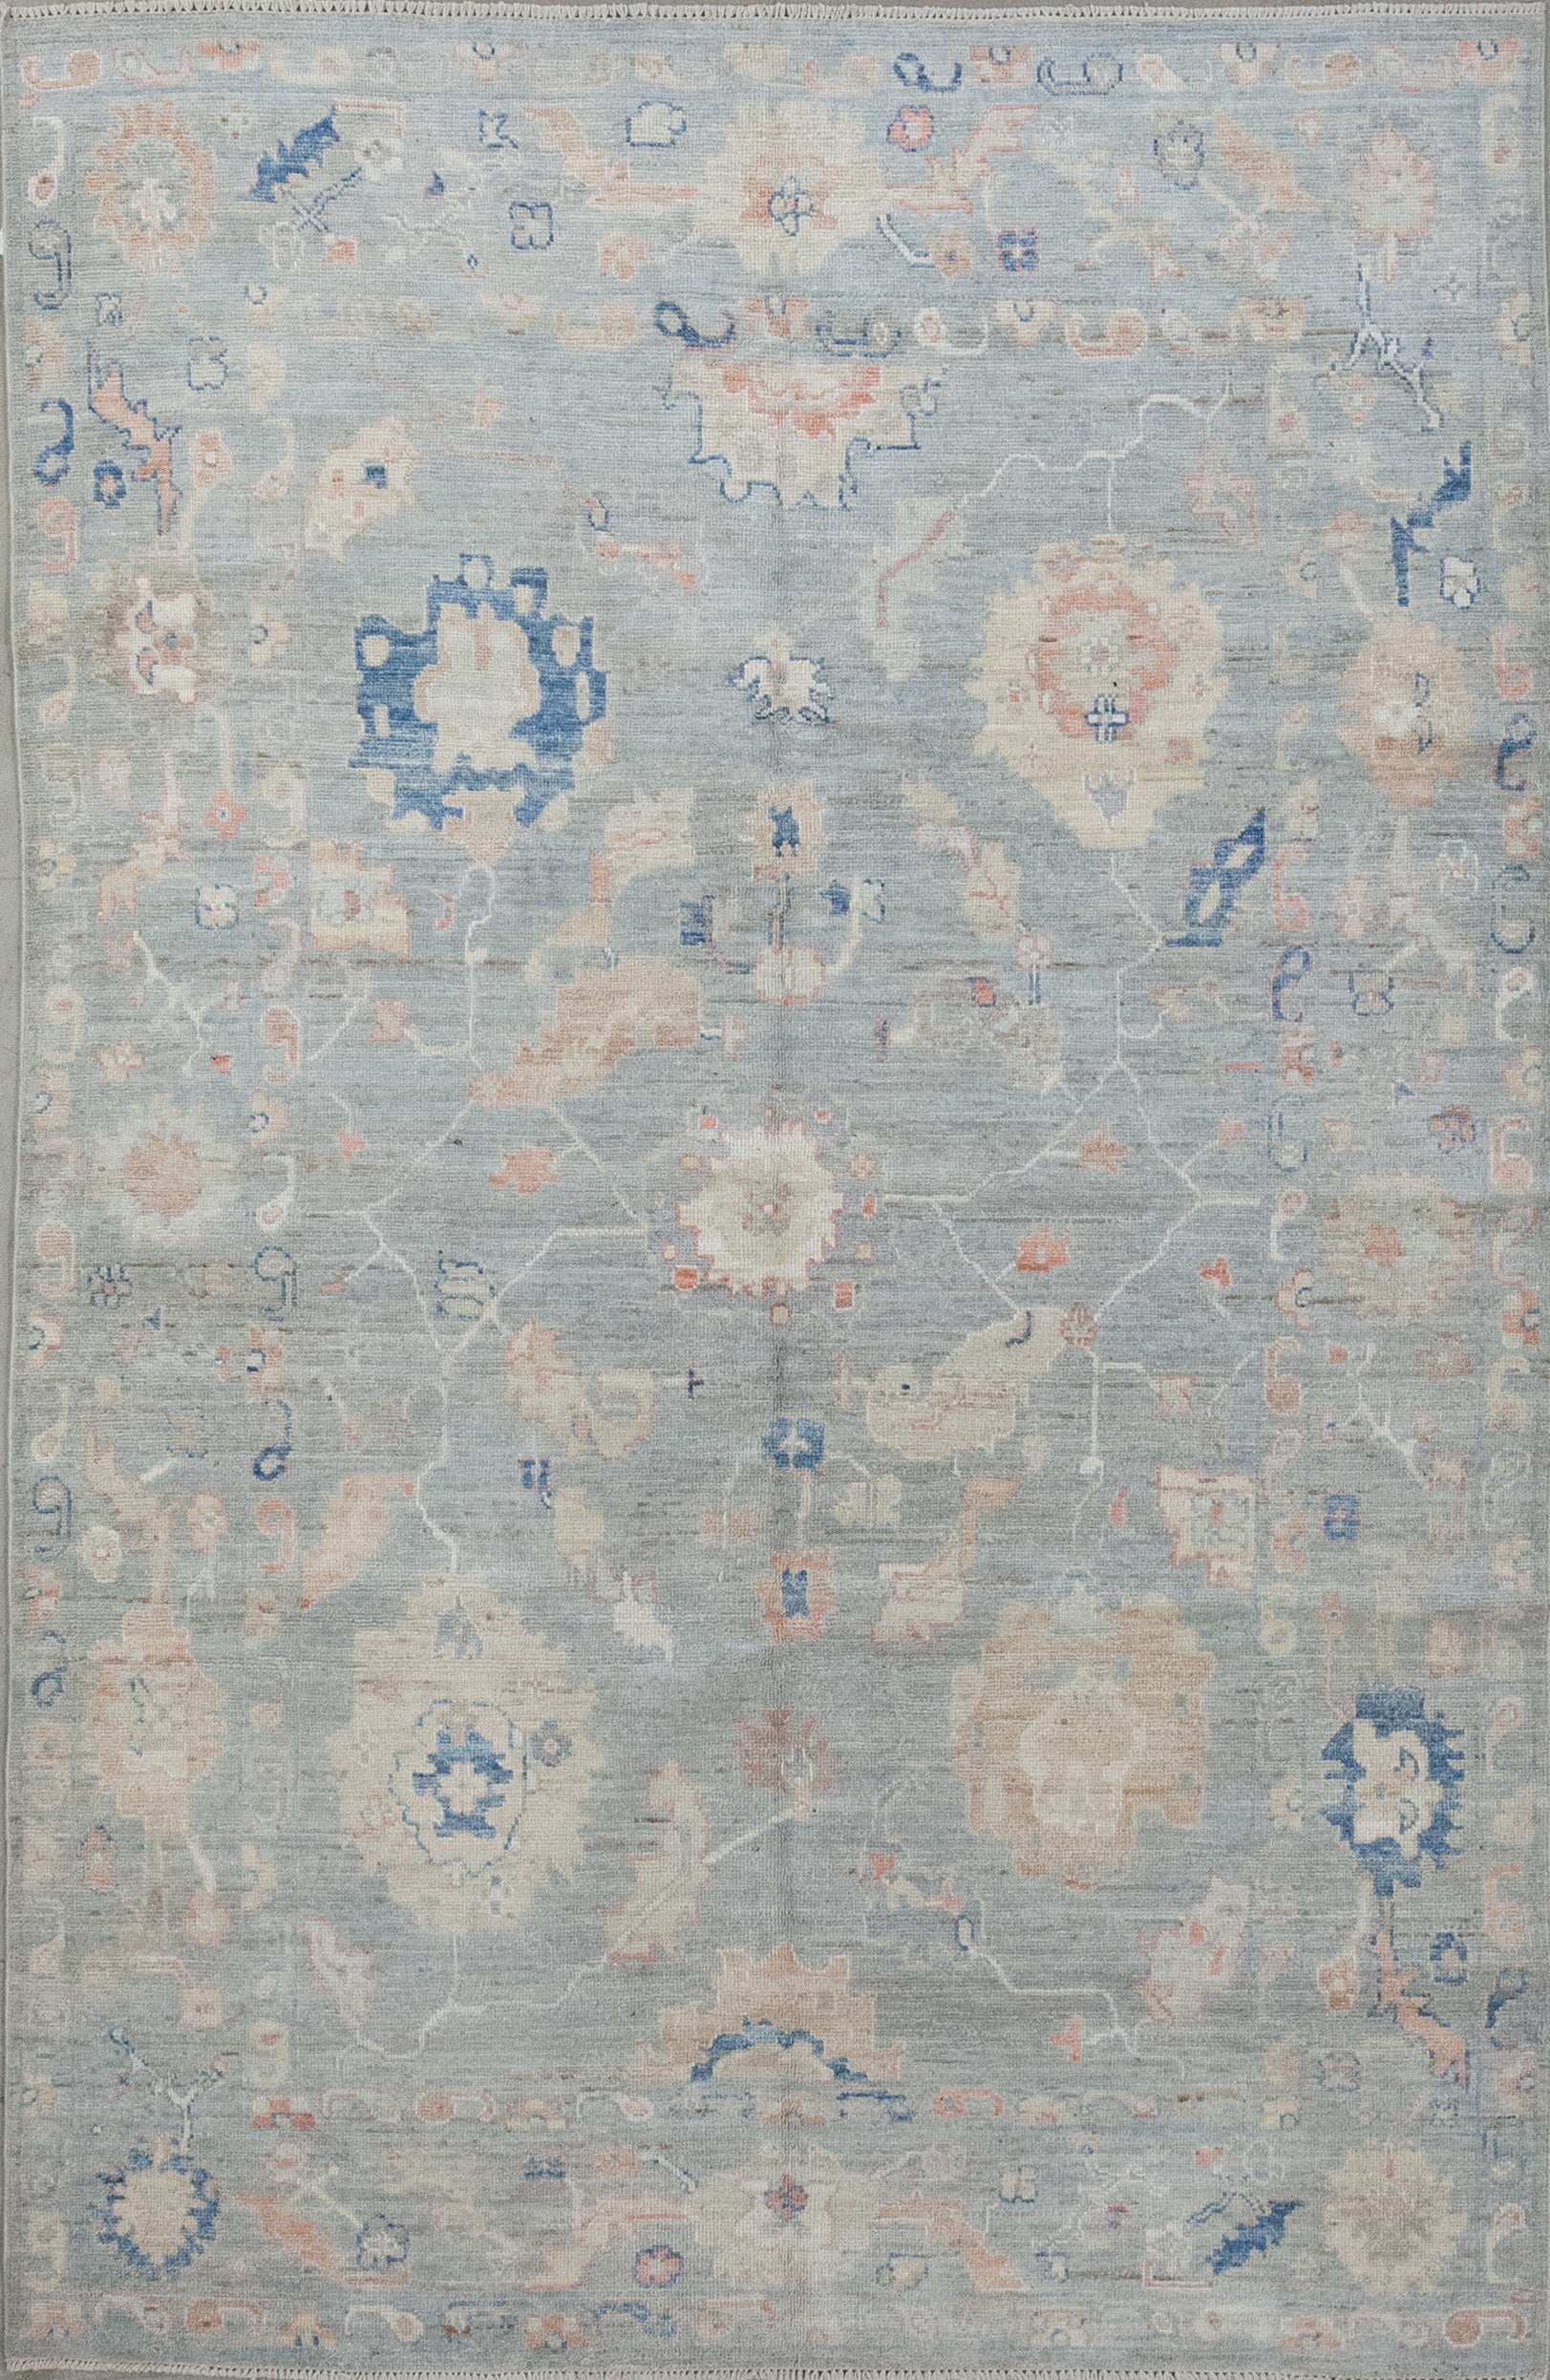 This classic rug was woven with gray background and a chaotic corals' abstraction as a pattern.